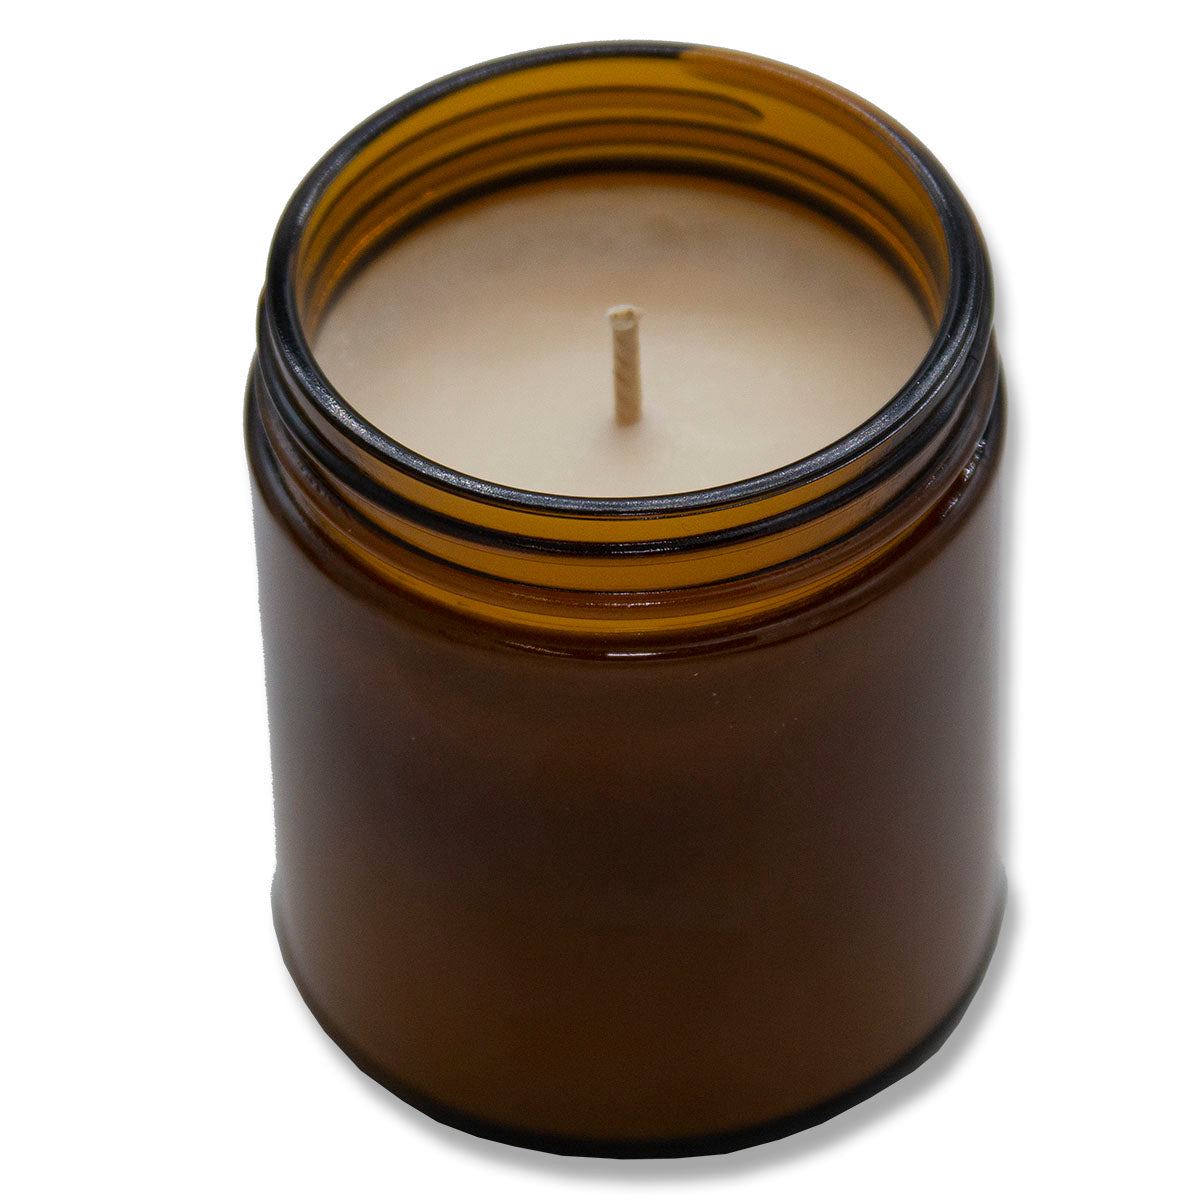 Mahogany Teakwood, Lone Star Candles & More's Premium Hand Poured Strongly Scented Soy Wax Gift Candle, A Rich Blend of Fine Woods and Florals, USA Made in Texas, Amber Glass Jar 9oz Happy Birthday